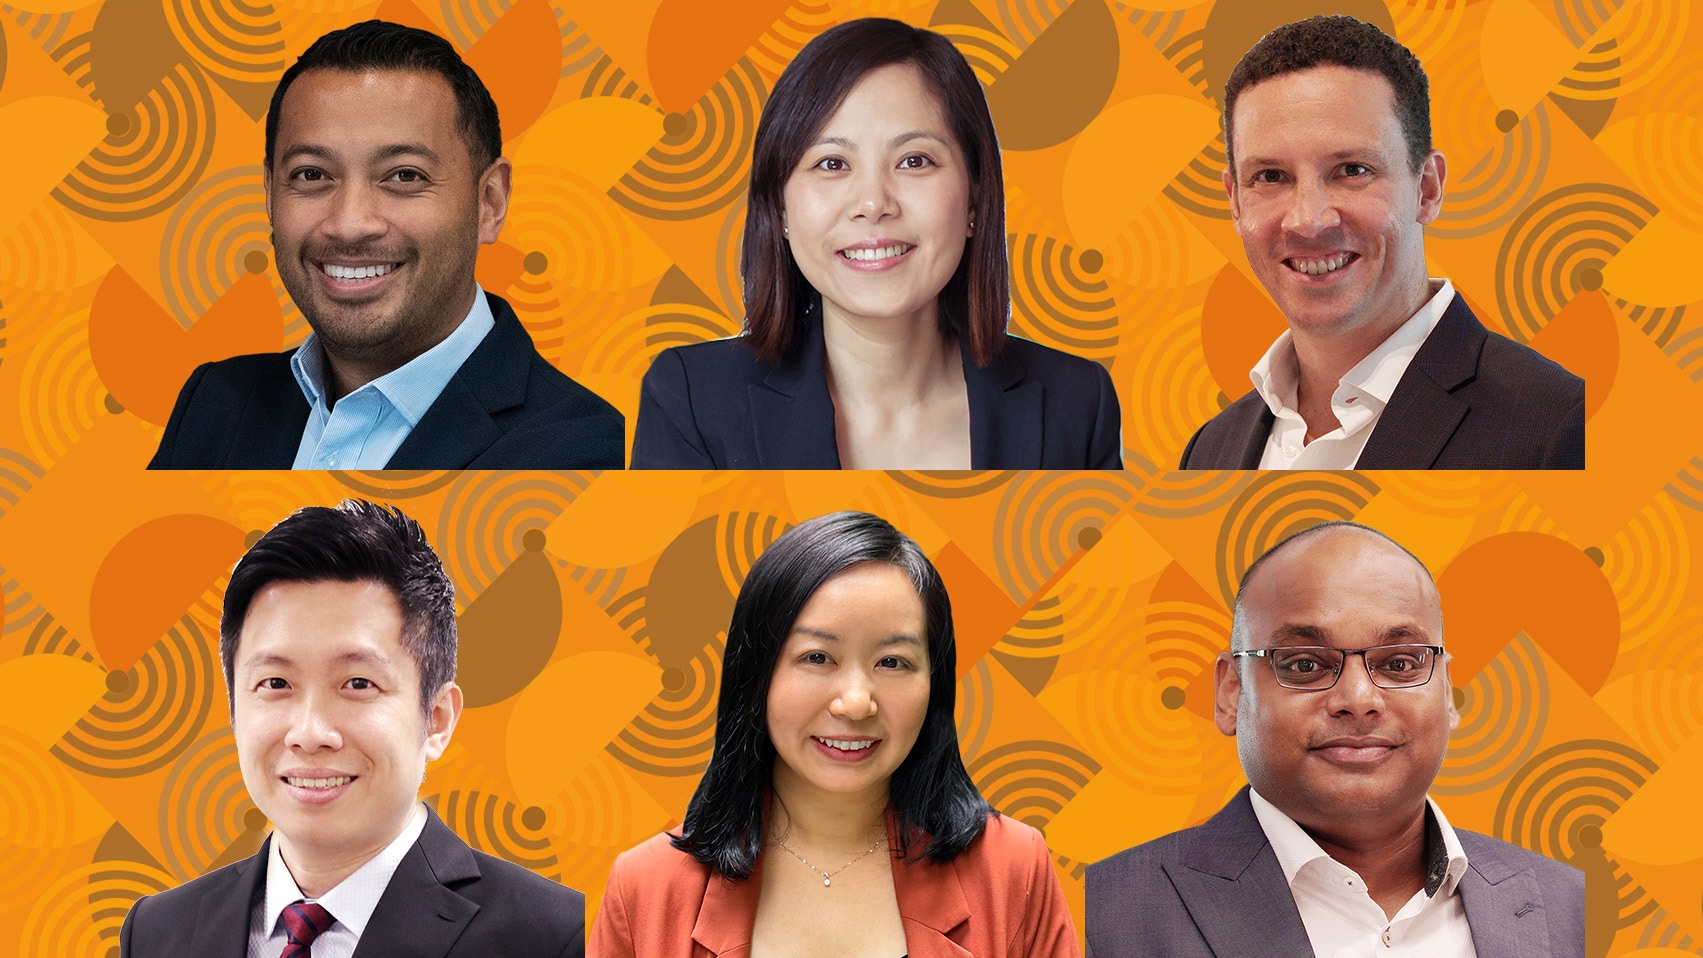 Meet our new Partners PwC Singapore